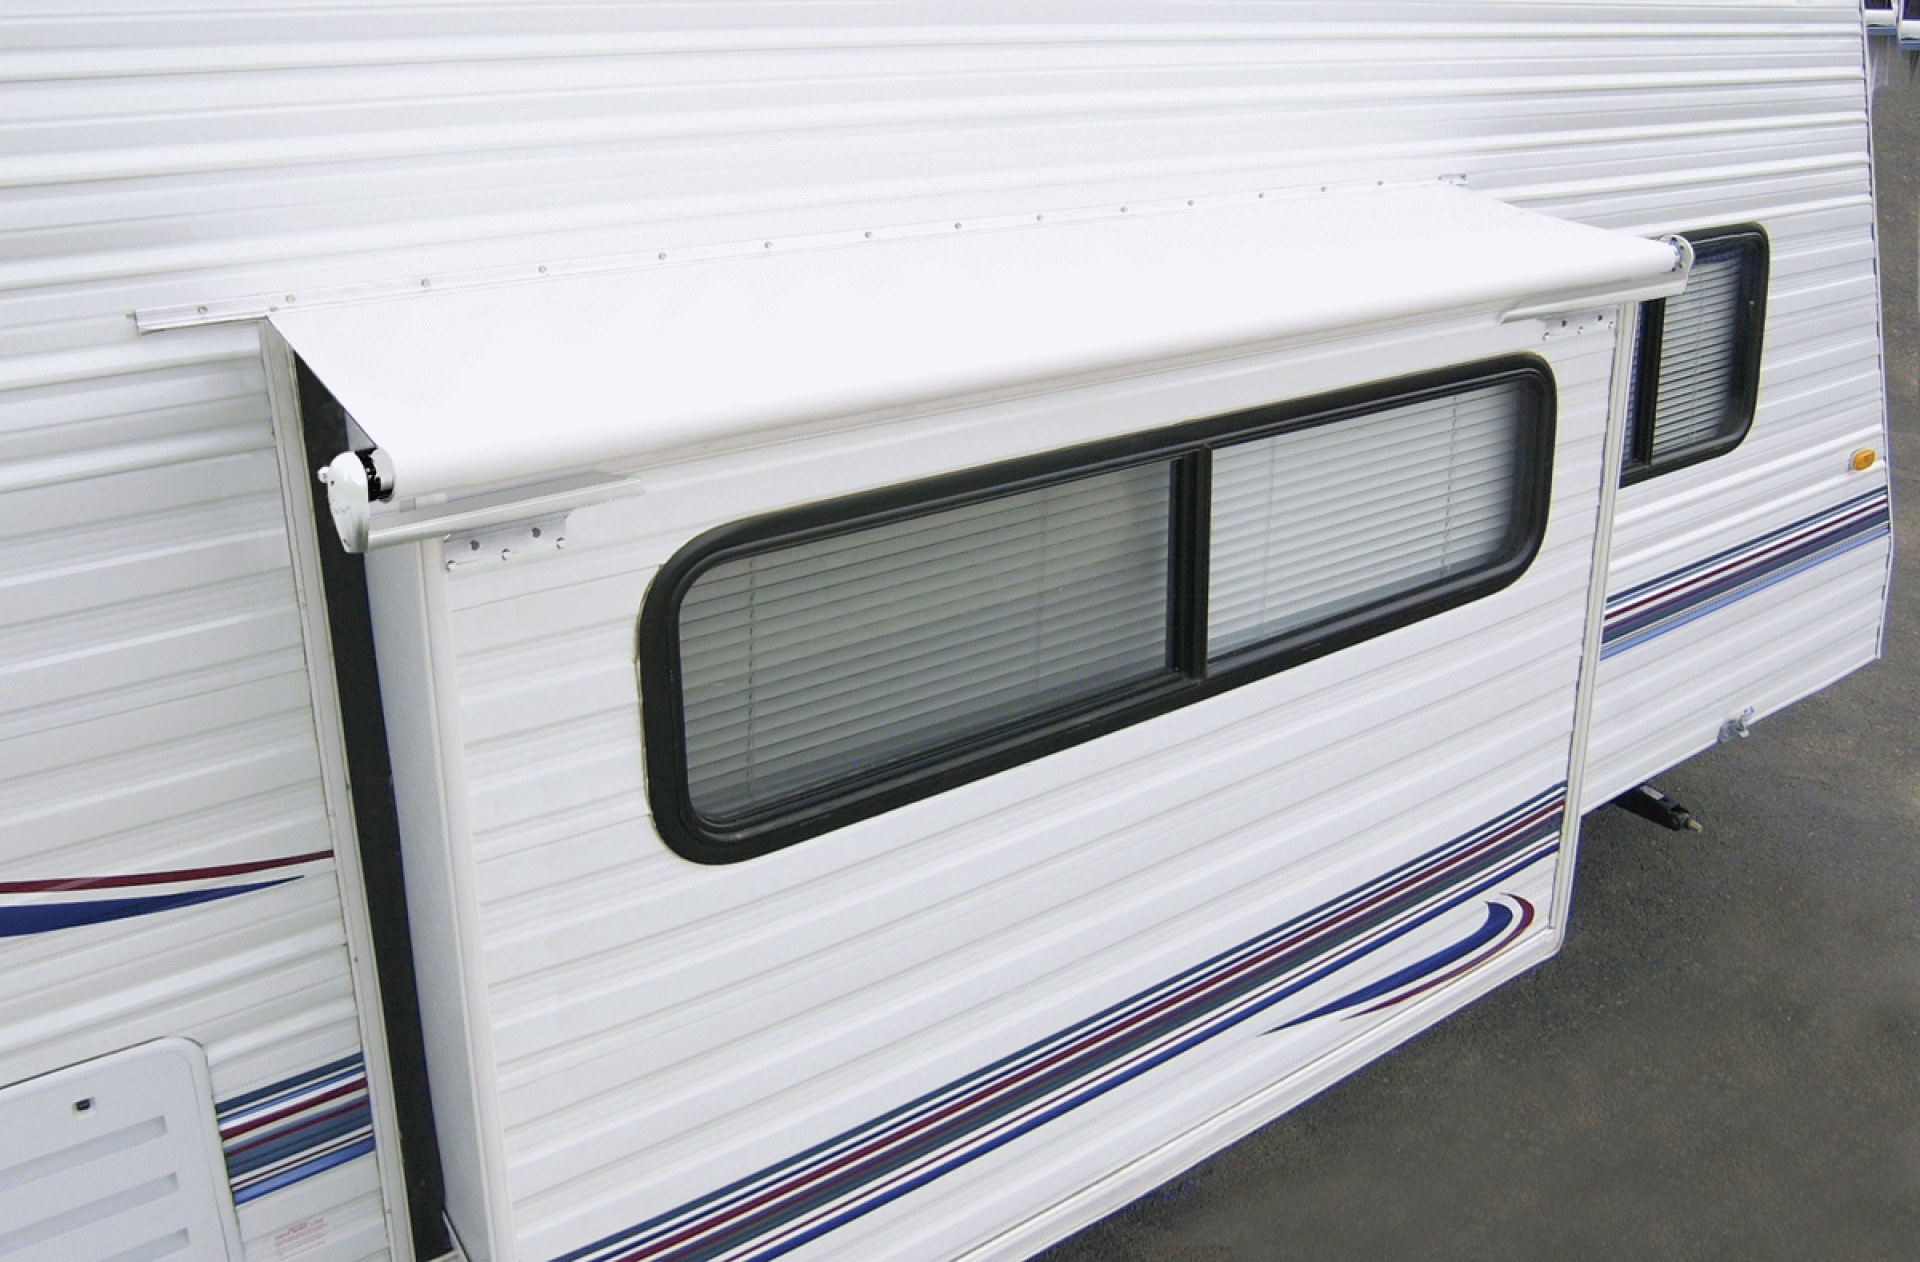 CAREFREE OF COLORADO | LH1530042 | SLIDEOUT COVER AWNING 146" - 153.9" ROOF RANGE WHITE VINYL